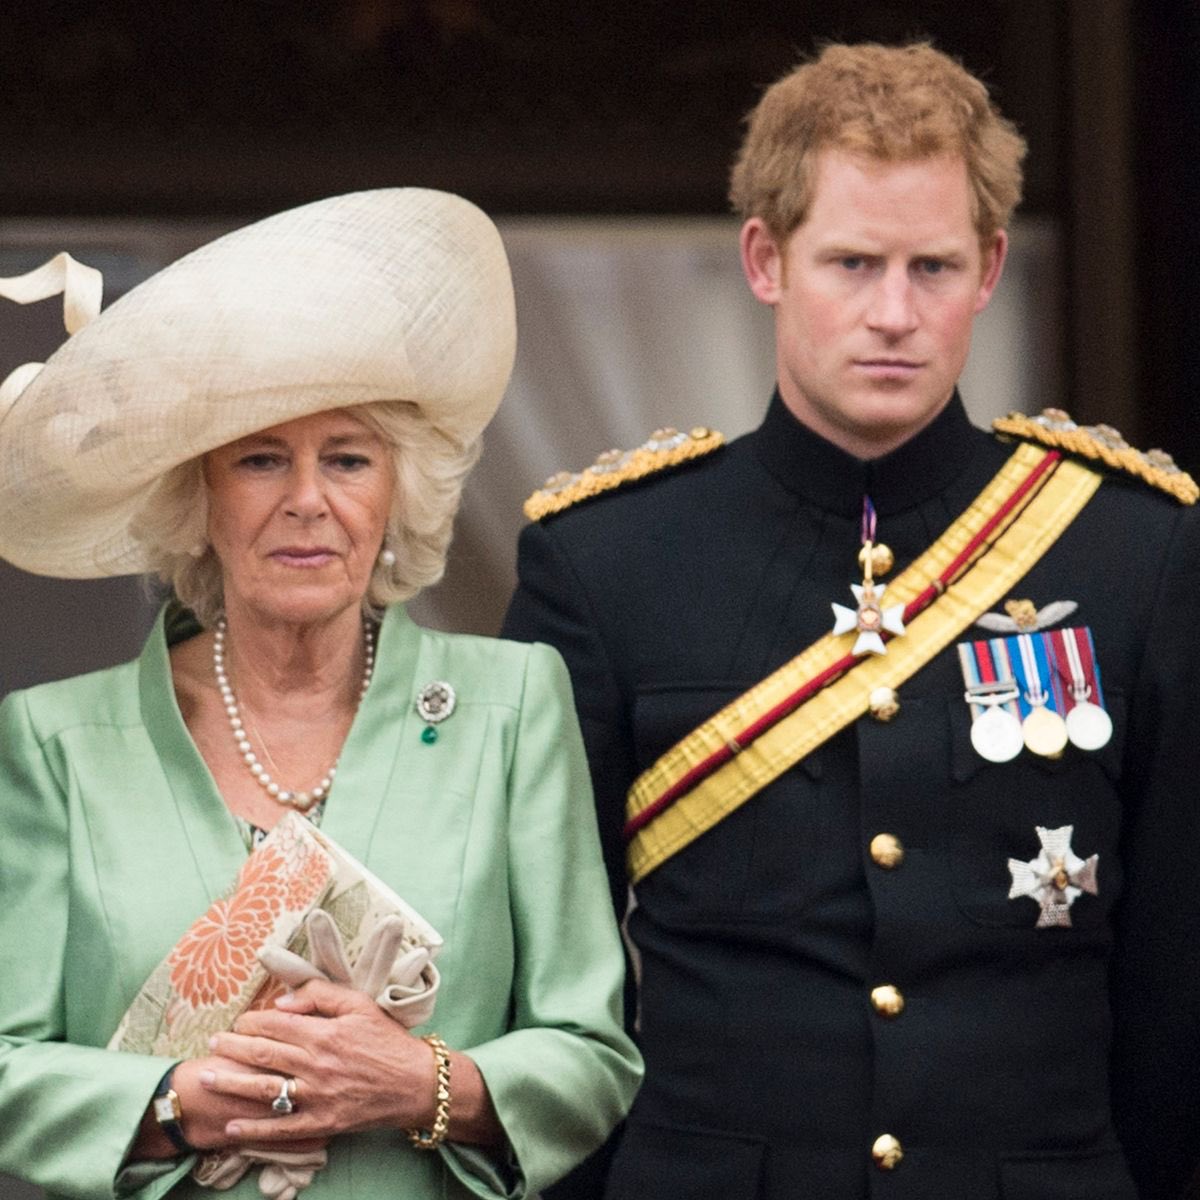 Prince Harry said ‘nasty things’ about Queen consort Camilla, according to royal biographer.